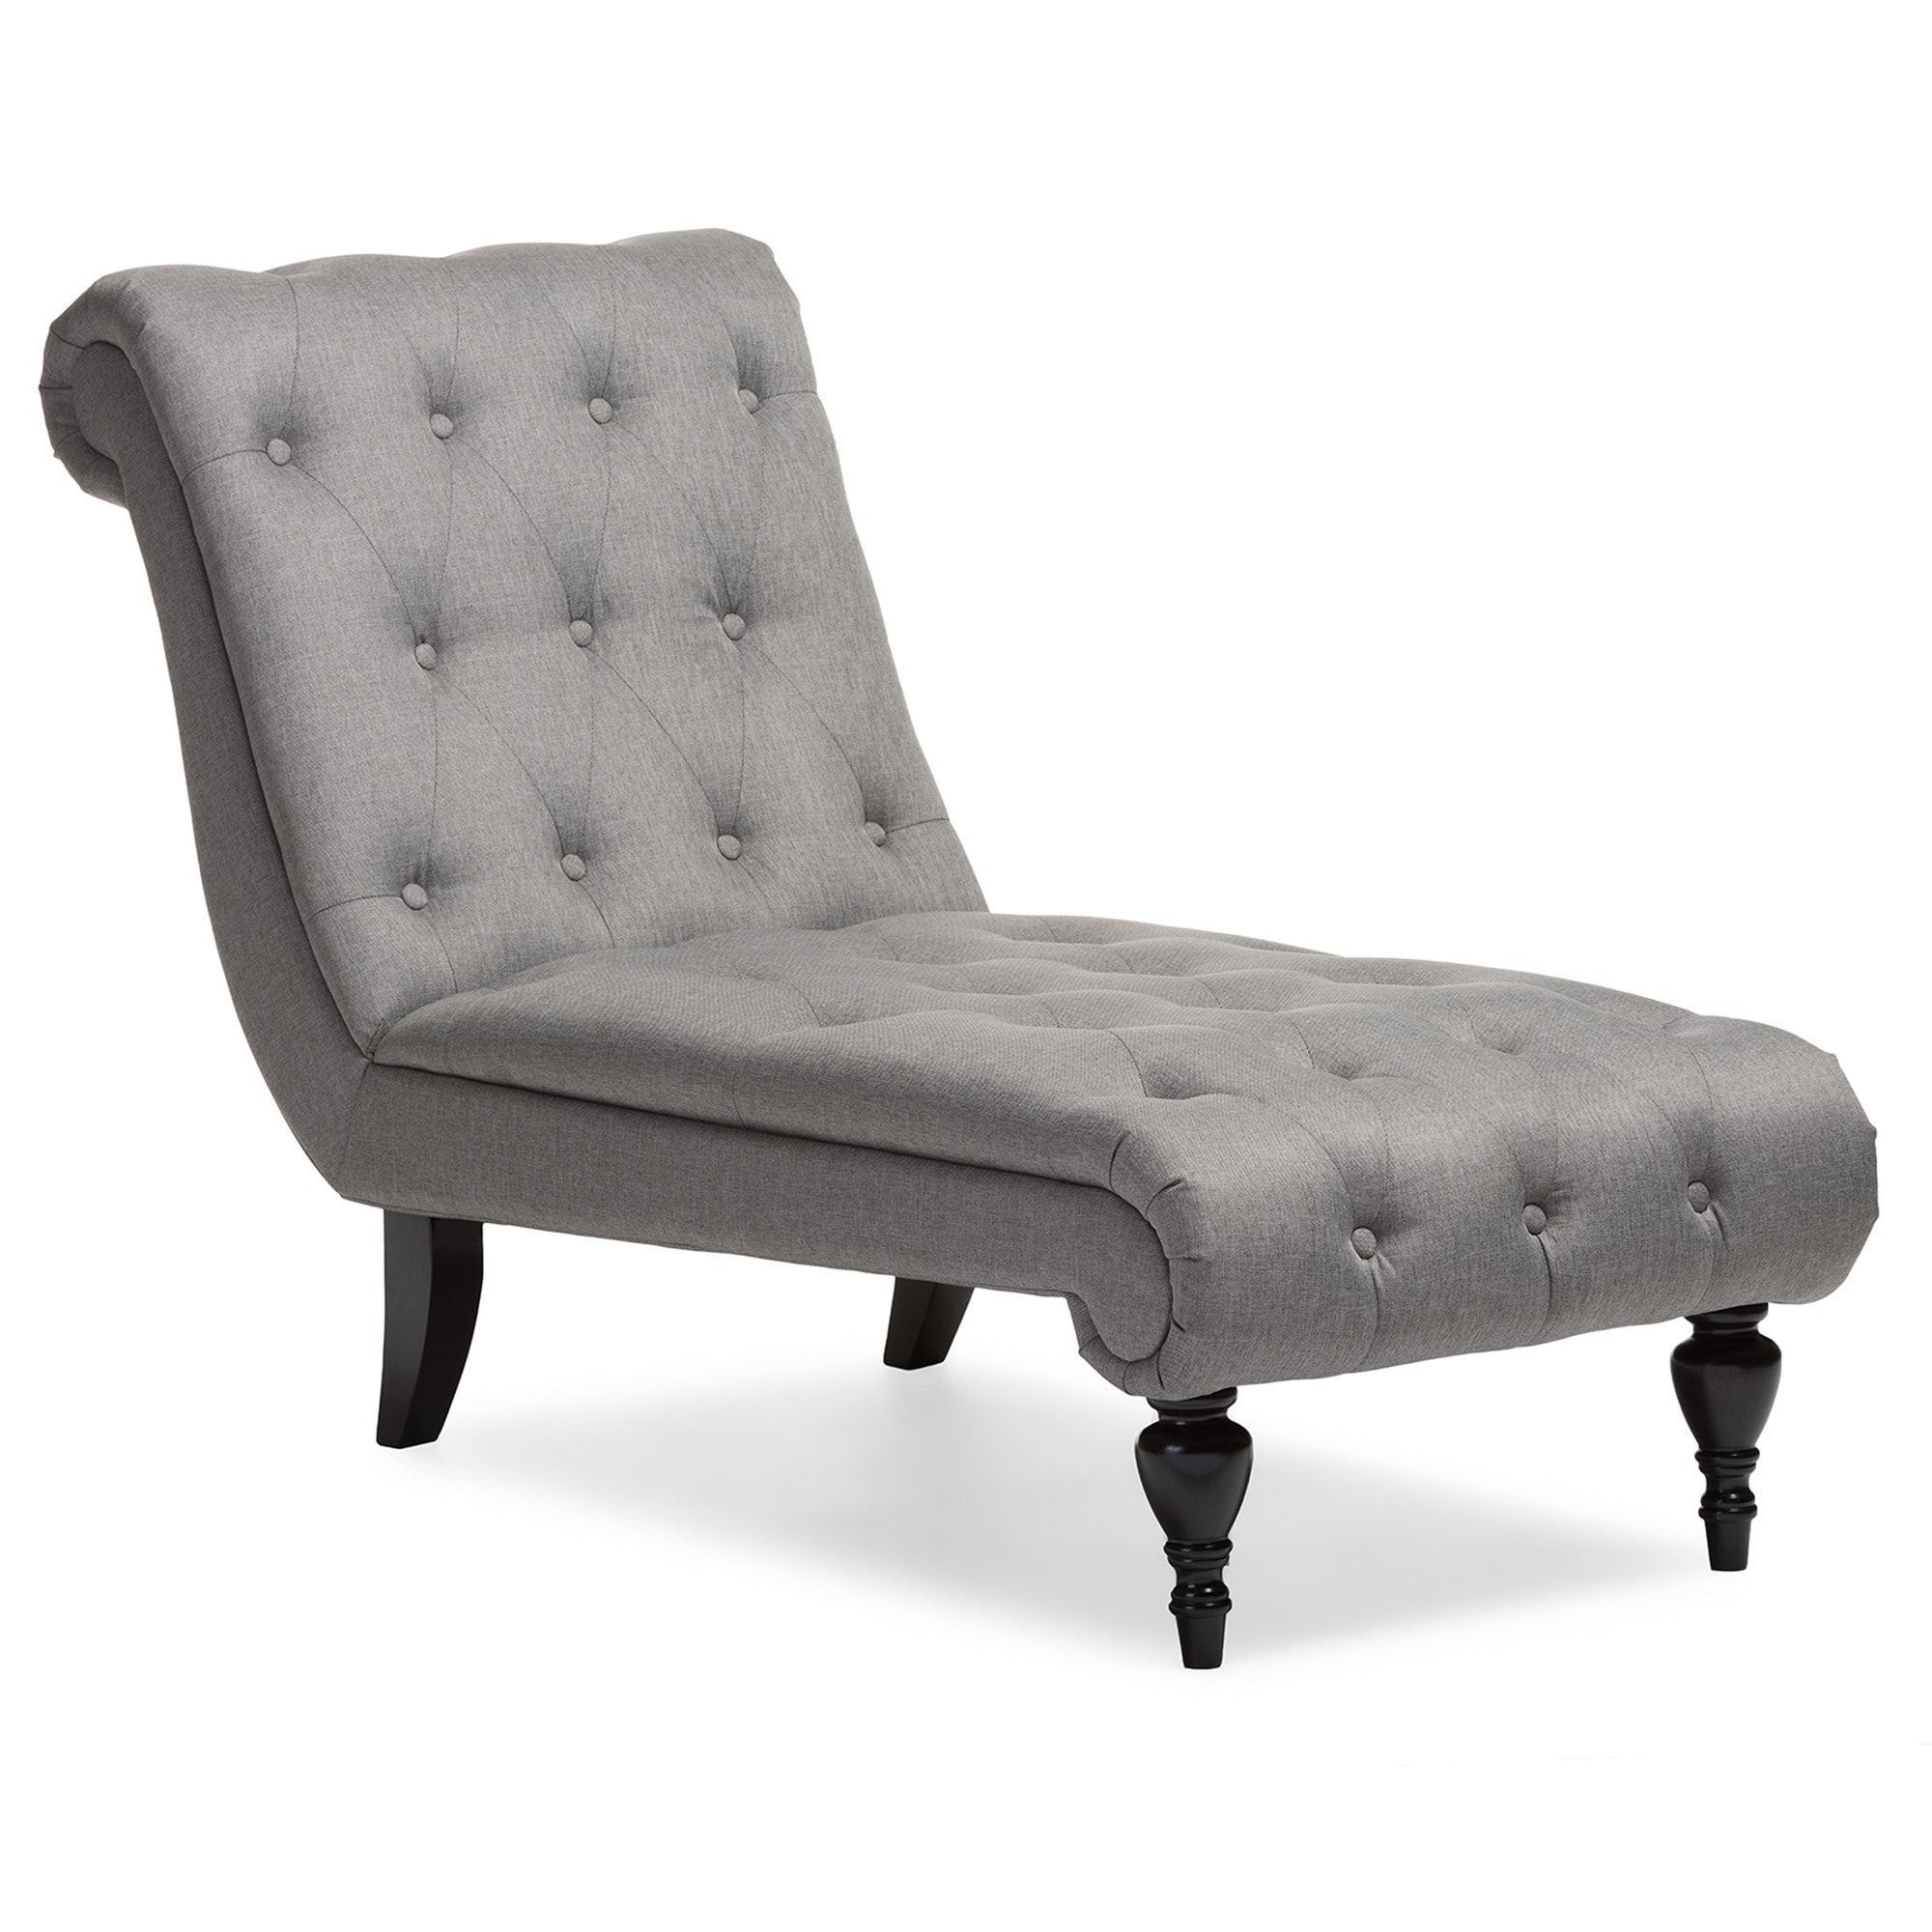 Baxton Studio Layla Mid Century Retro Modern Grey Fabric In Favorite Mid Century Modern Chaise Lounges (View 8 of 15)